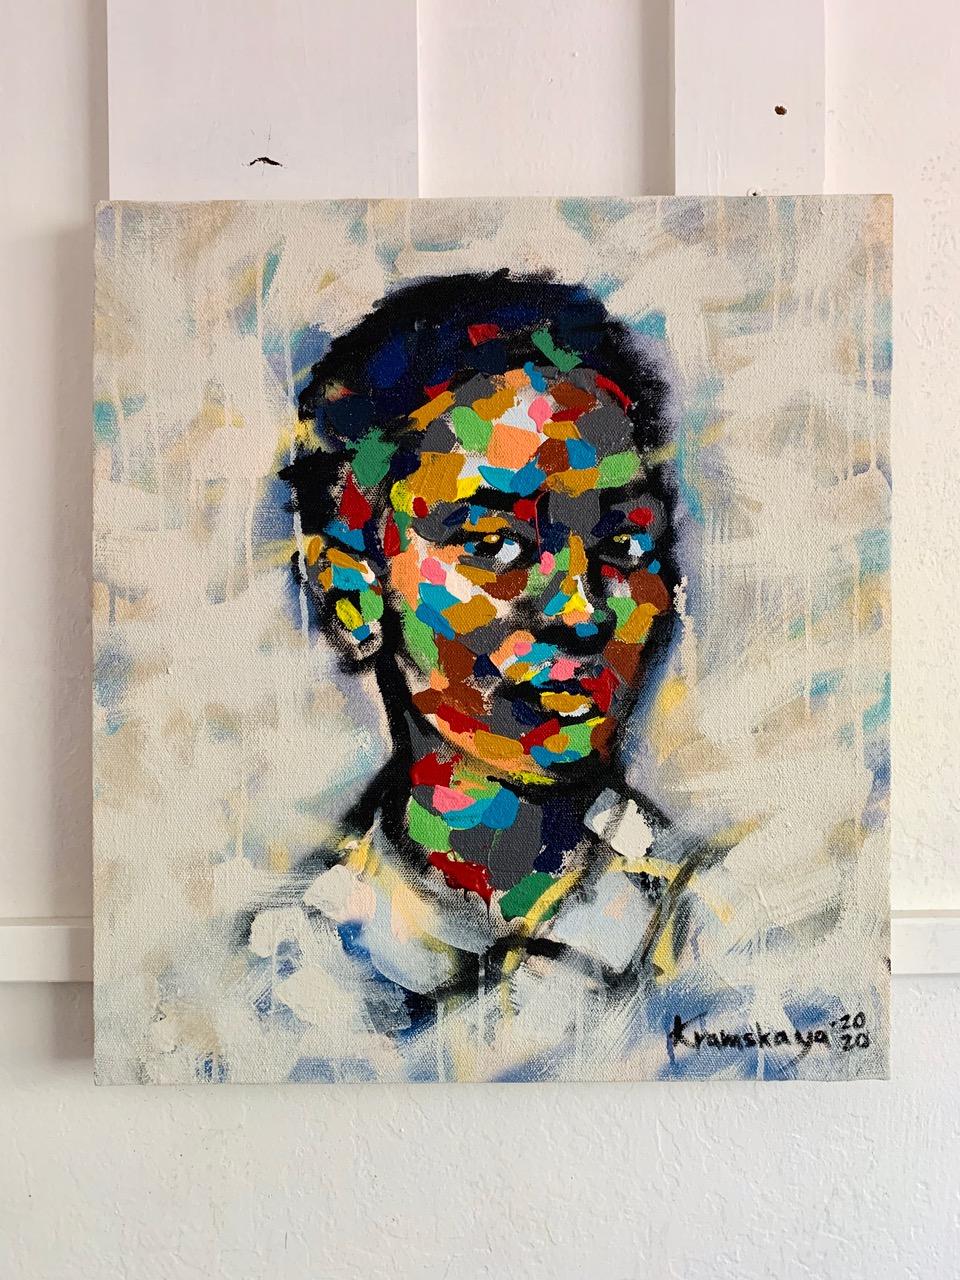 Her Smile- Colorful Abstract Portrait of Black Woman Blue + Ochre + Grey + Green - Painting by Natasha Kramskaya